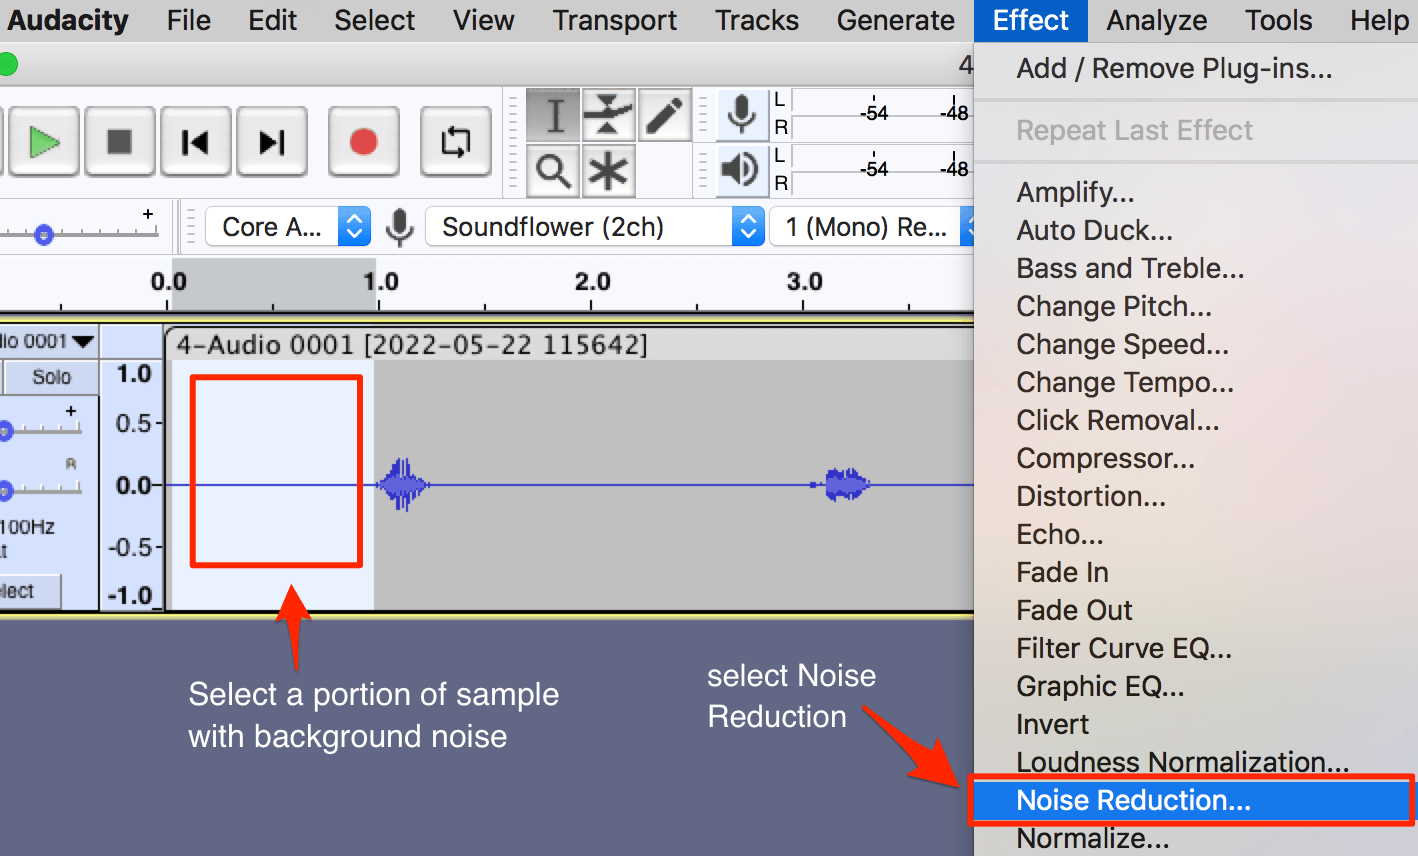 audacity screenshot with portion of sample selected